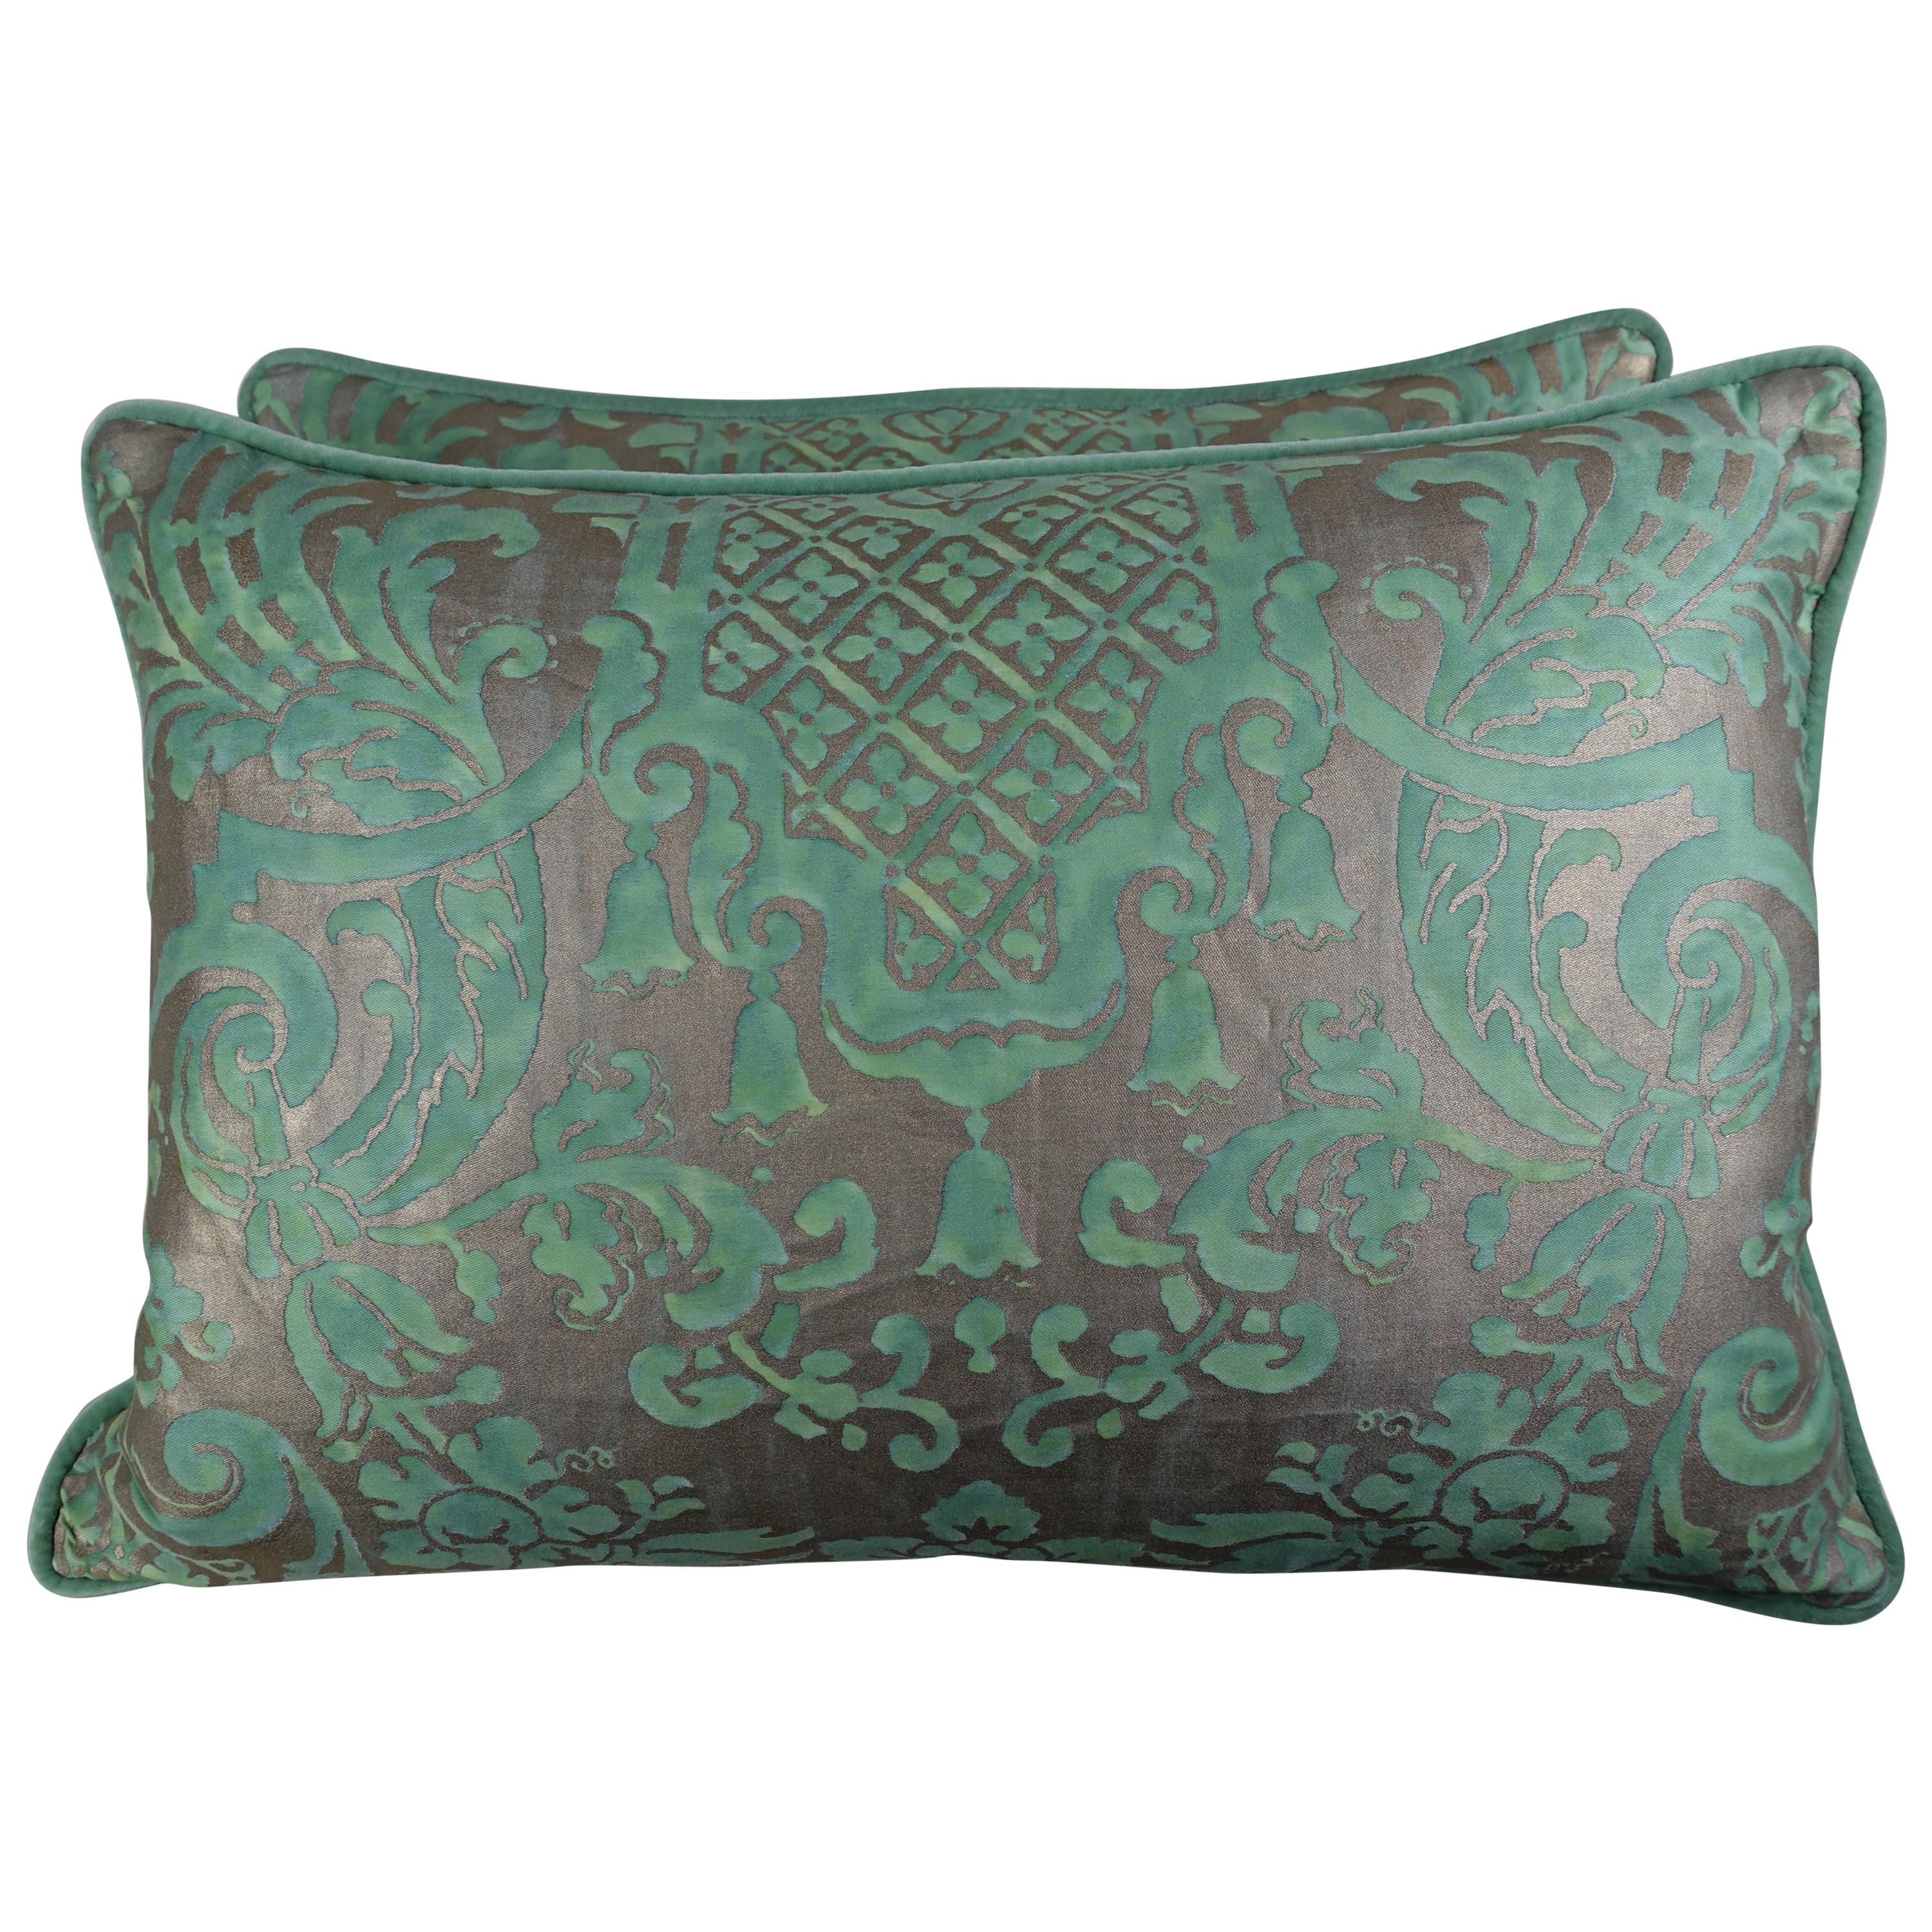 Carnavalet Patterned Fortuny Pillows, a Pair